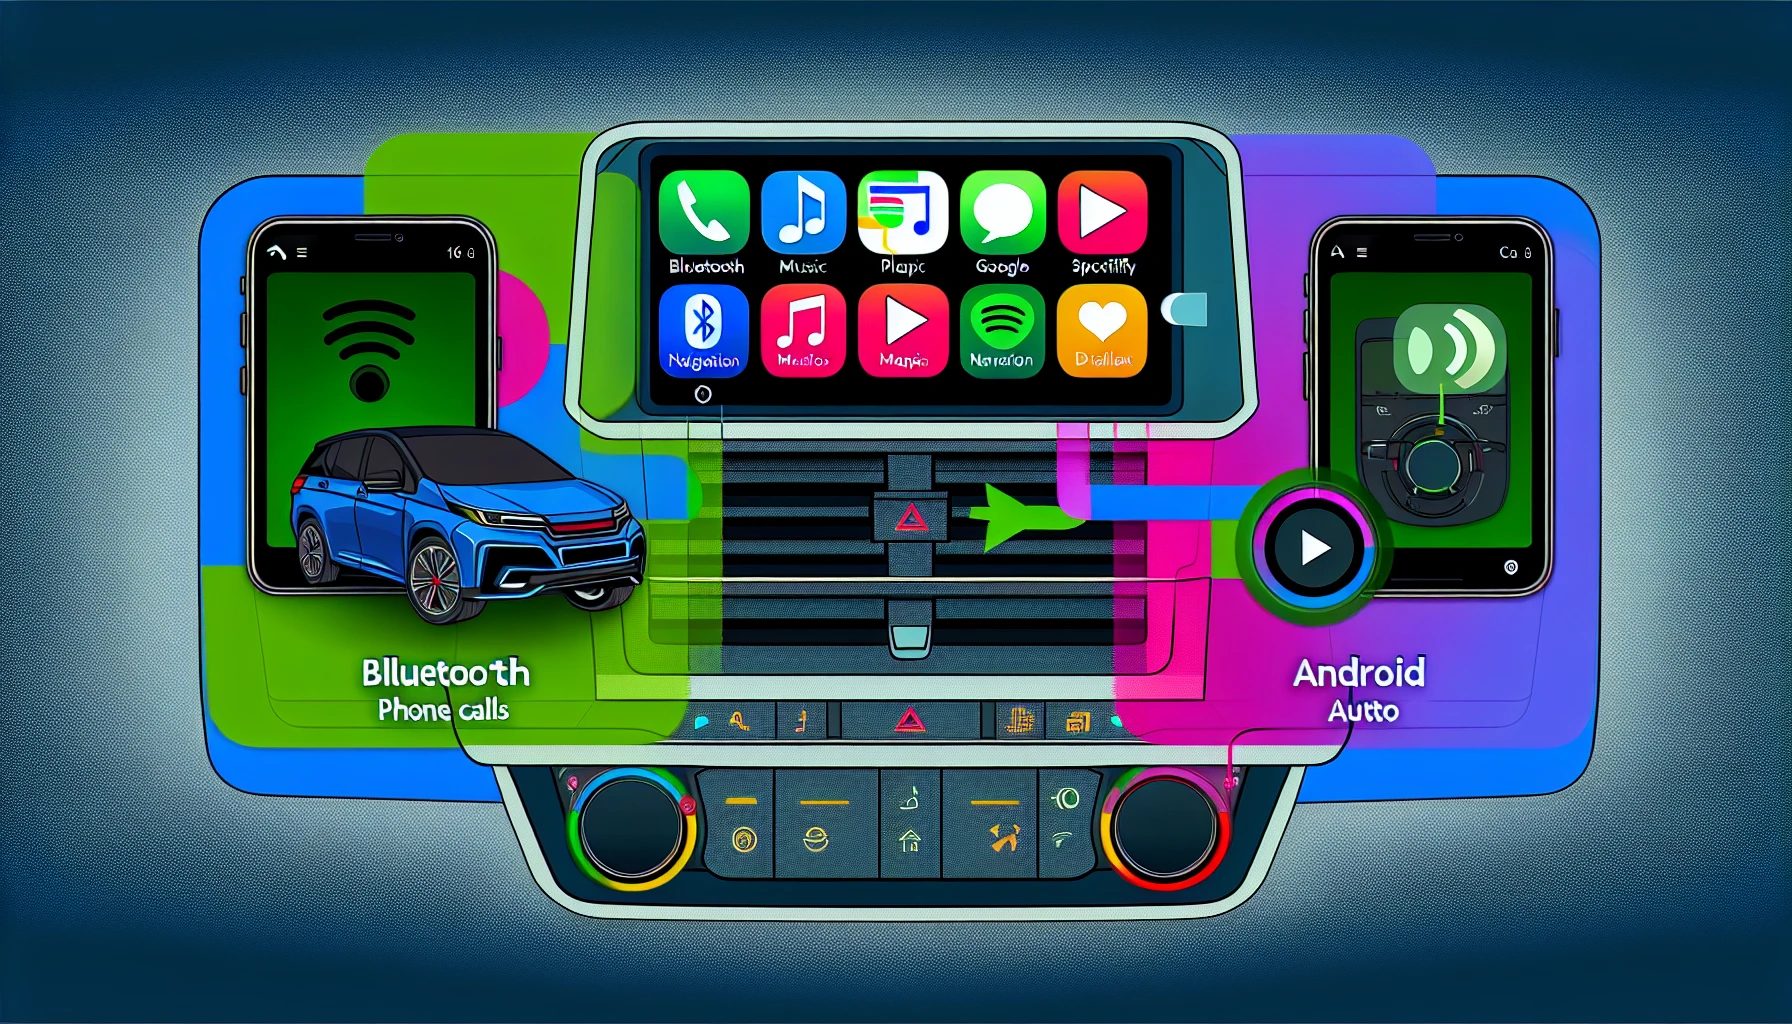 Connectivity options in car audio systems including Bluetooth, Apple CarPlay, and Android Auto